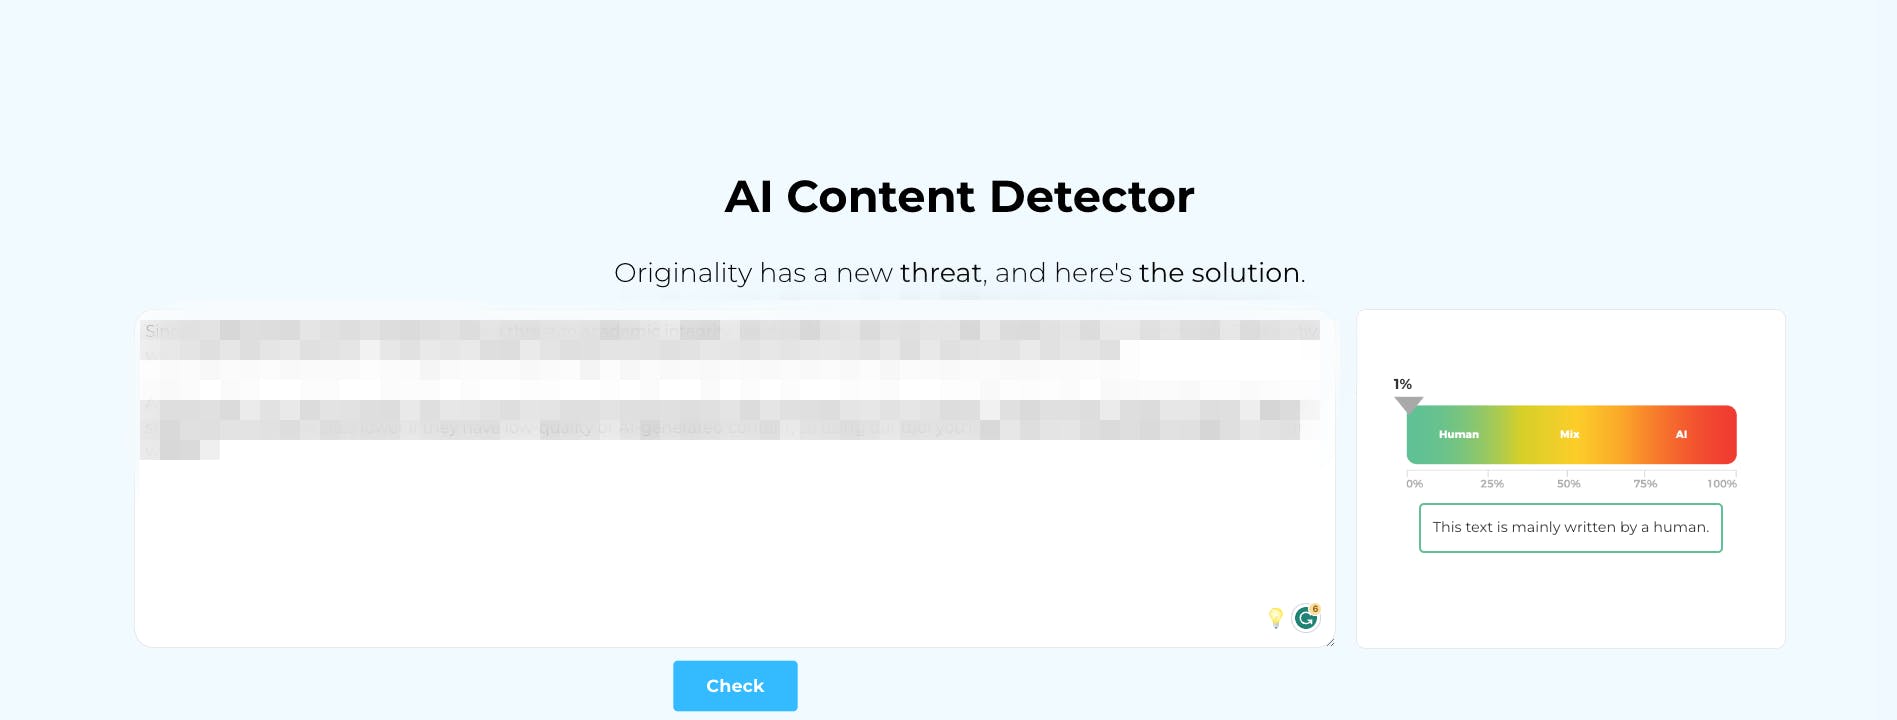 AI Content Detector from Crossplag media 2